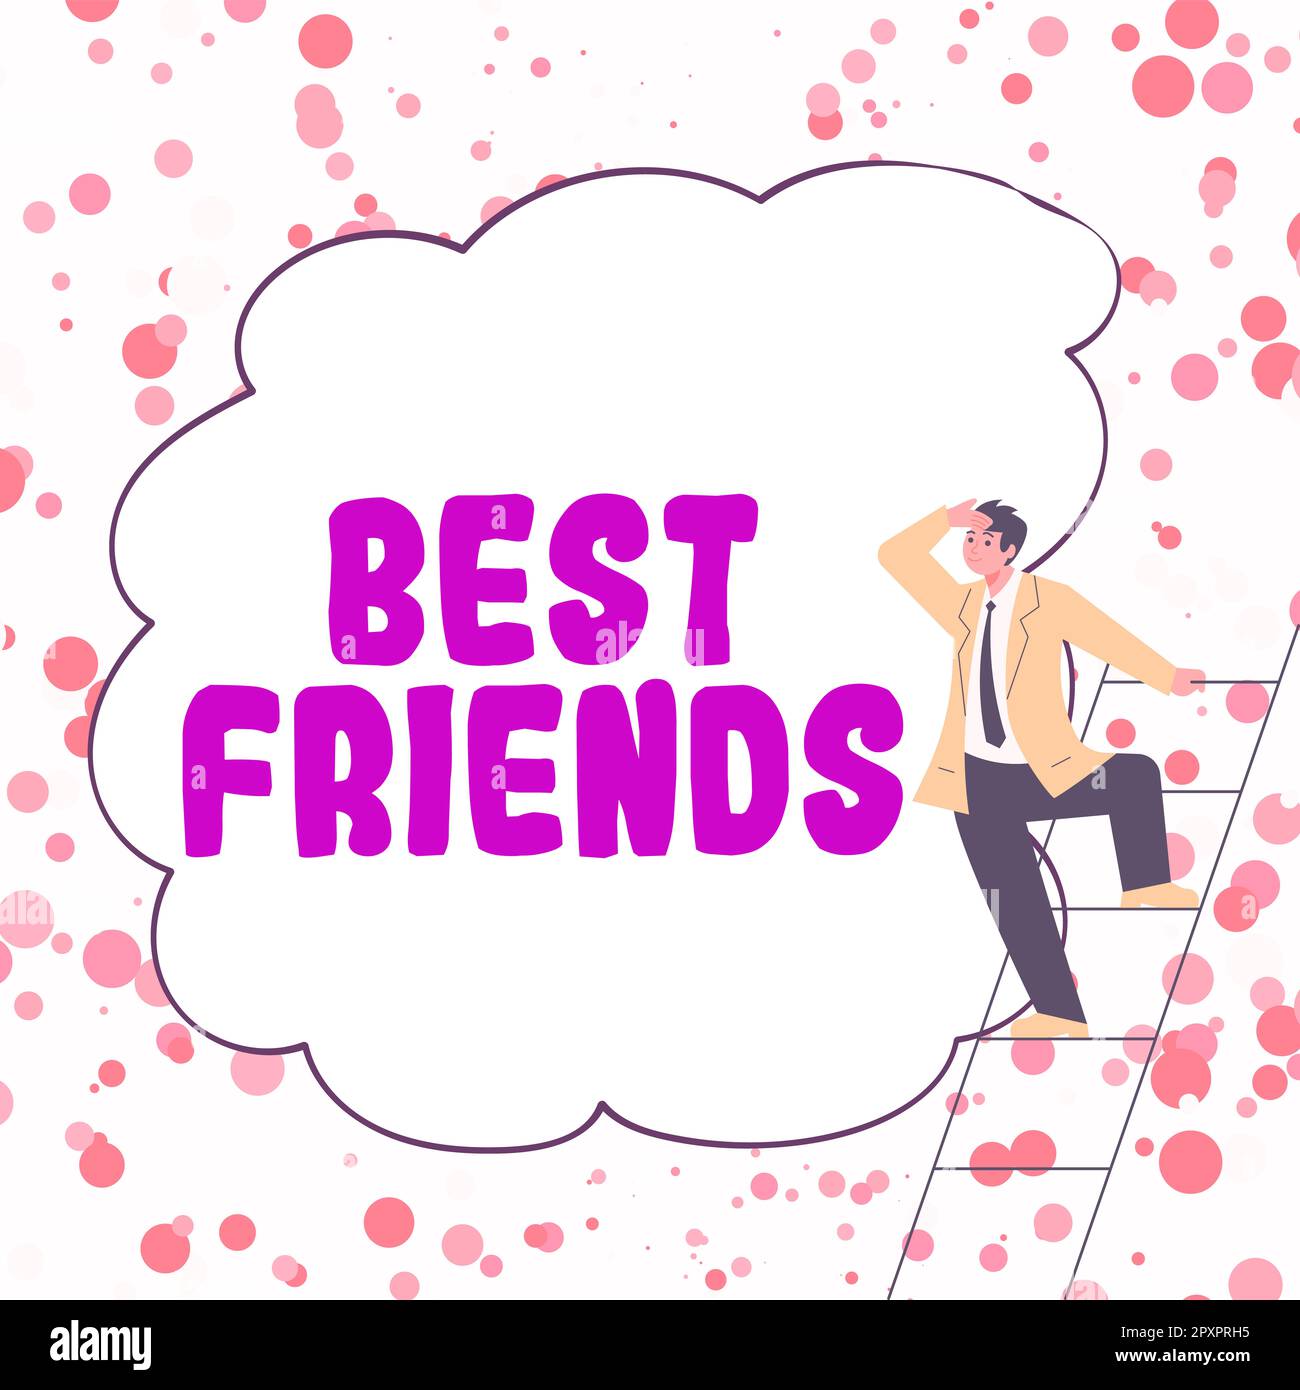 Text caption presenting Best Friends, Business concept A person you value above other persons Forever buddies Stock Photo